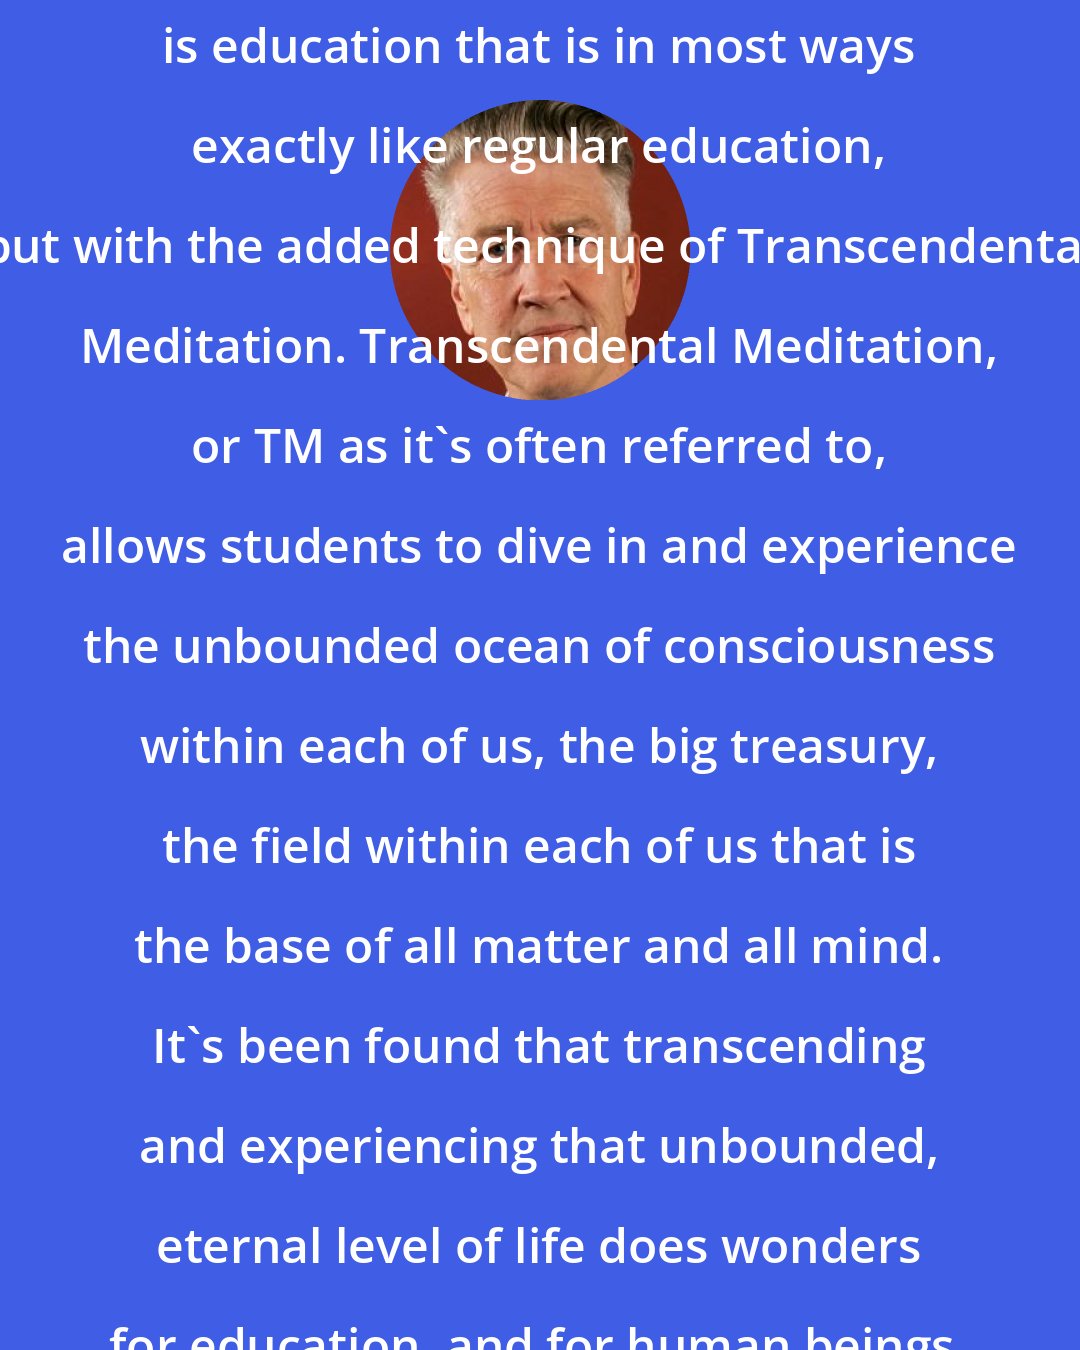 David Lynch: Consciousness-Based Education is education that is in most ways exactly like regular education, but with the added technique of Transcendental Meditation. Transcendental Meditation, or TM as it's often referred to, allows students to dive in and experience the unbounded ocean of consciousness within each of us, the big treasury, the field within each of us that is the base of all matter and all mind. It's been found that transcending and experiencing that unbounded, eternal level of life does wonders for education, and for human beings.